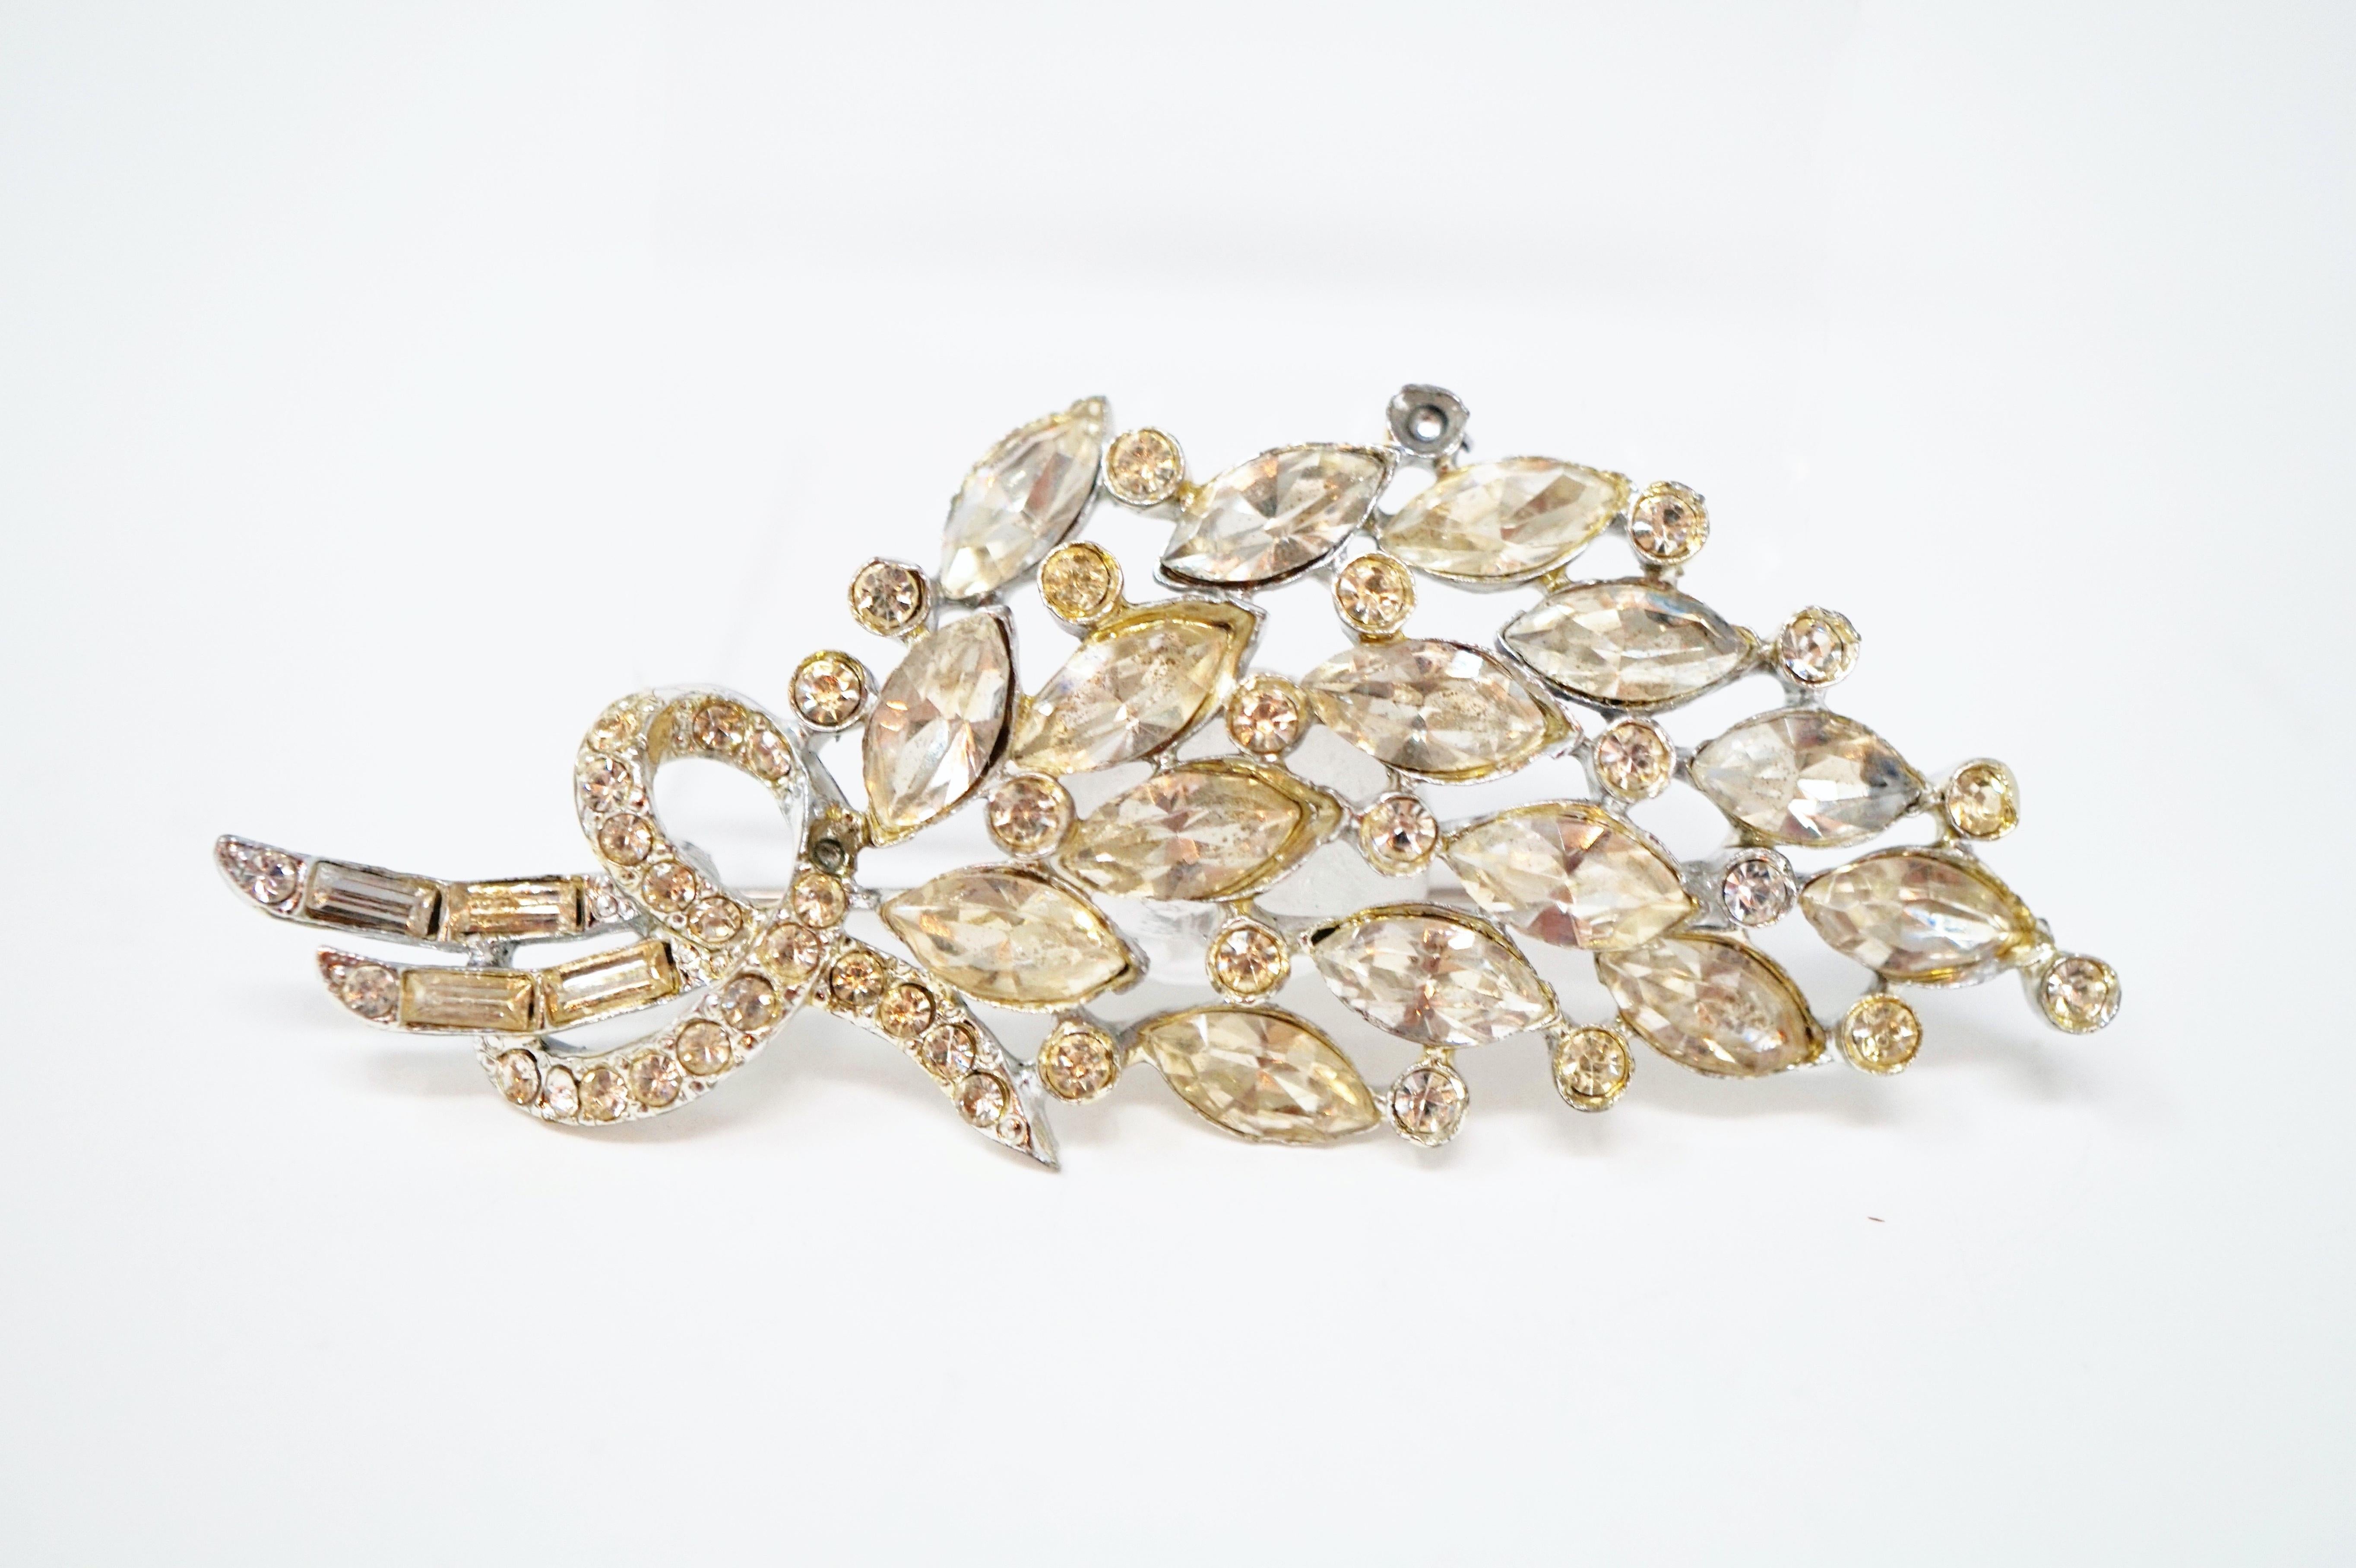 Vintage Crystal Rhinestone Bouquet Brooch, circa 1950s In Good Condition For Sale In McKinney, TX